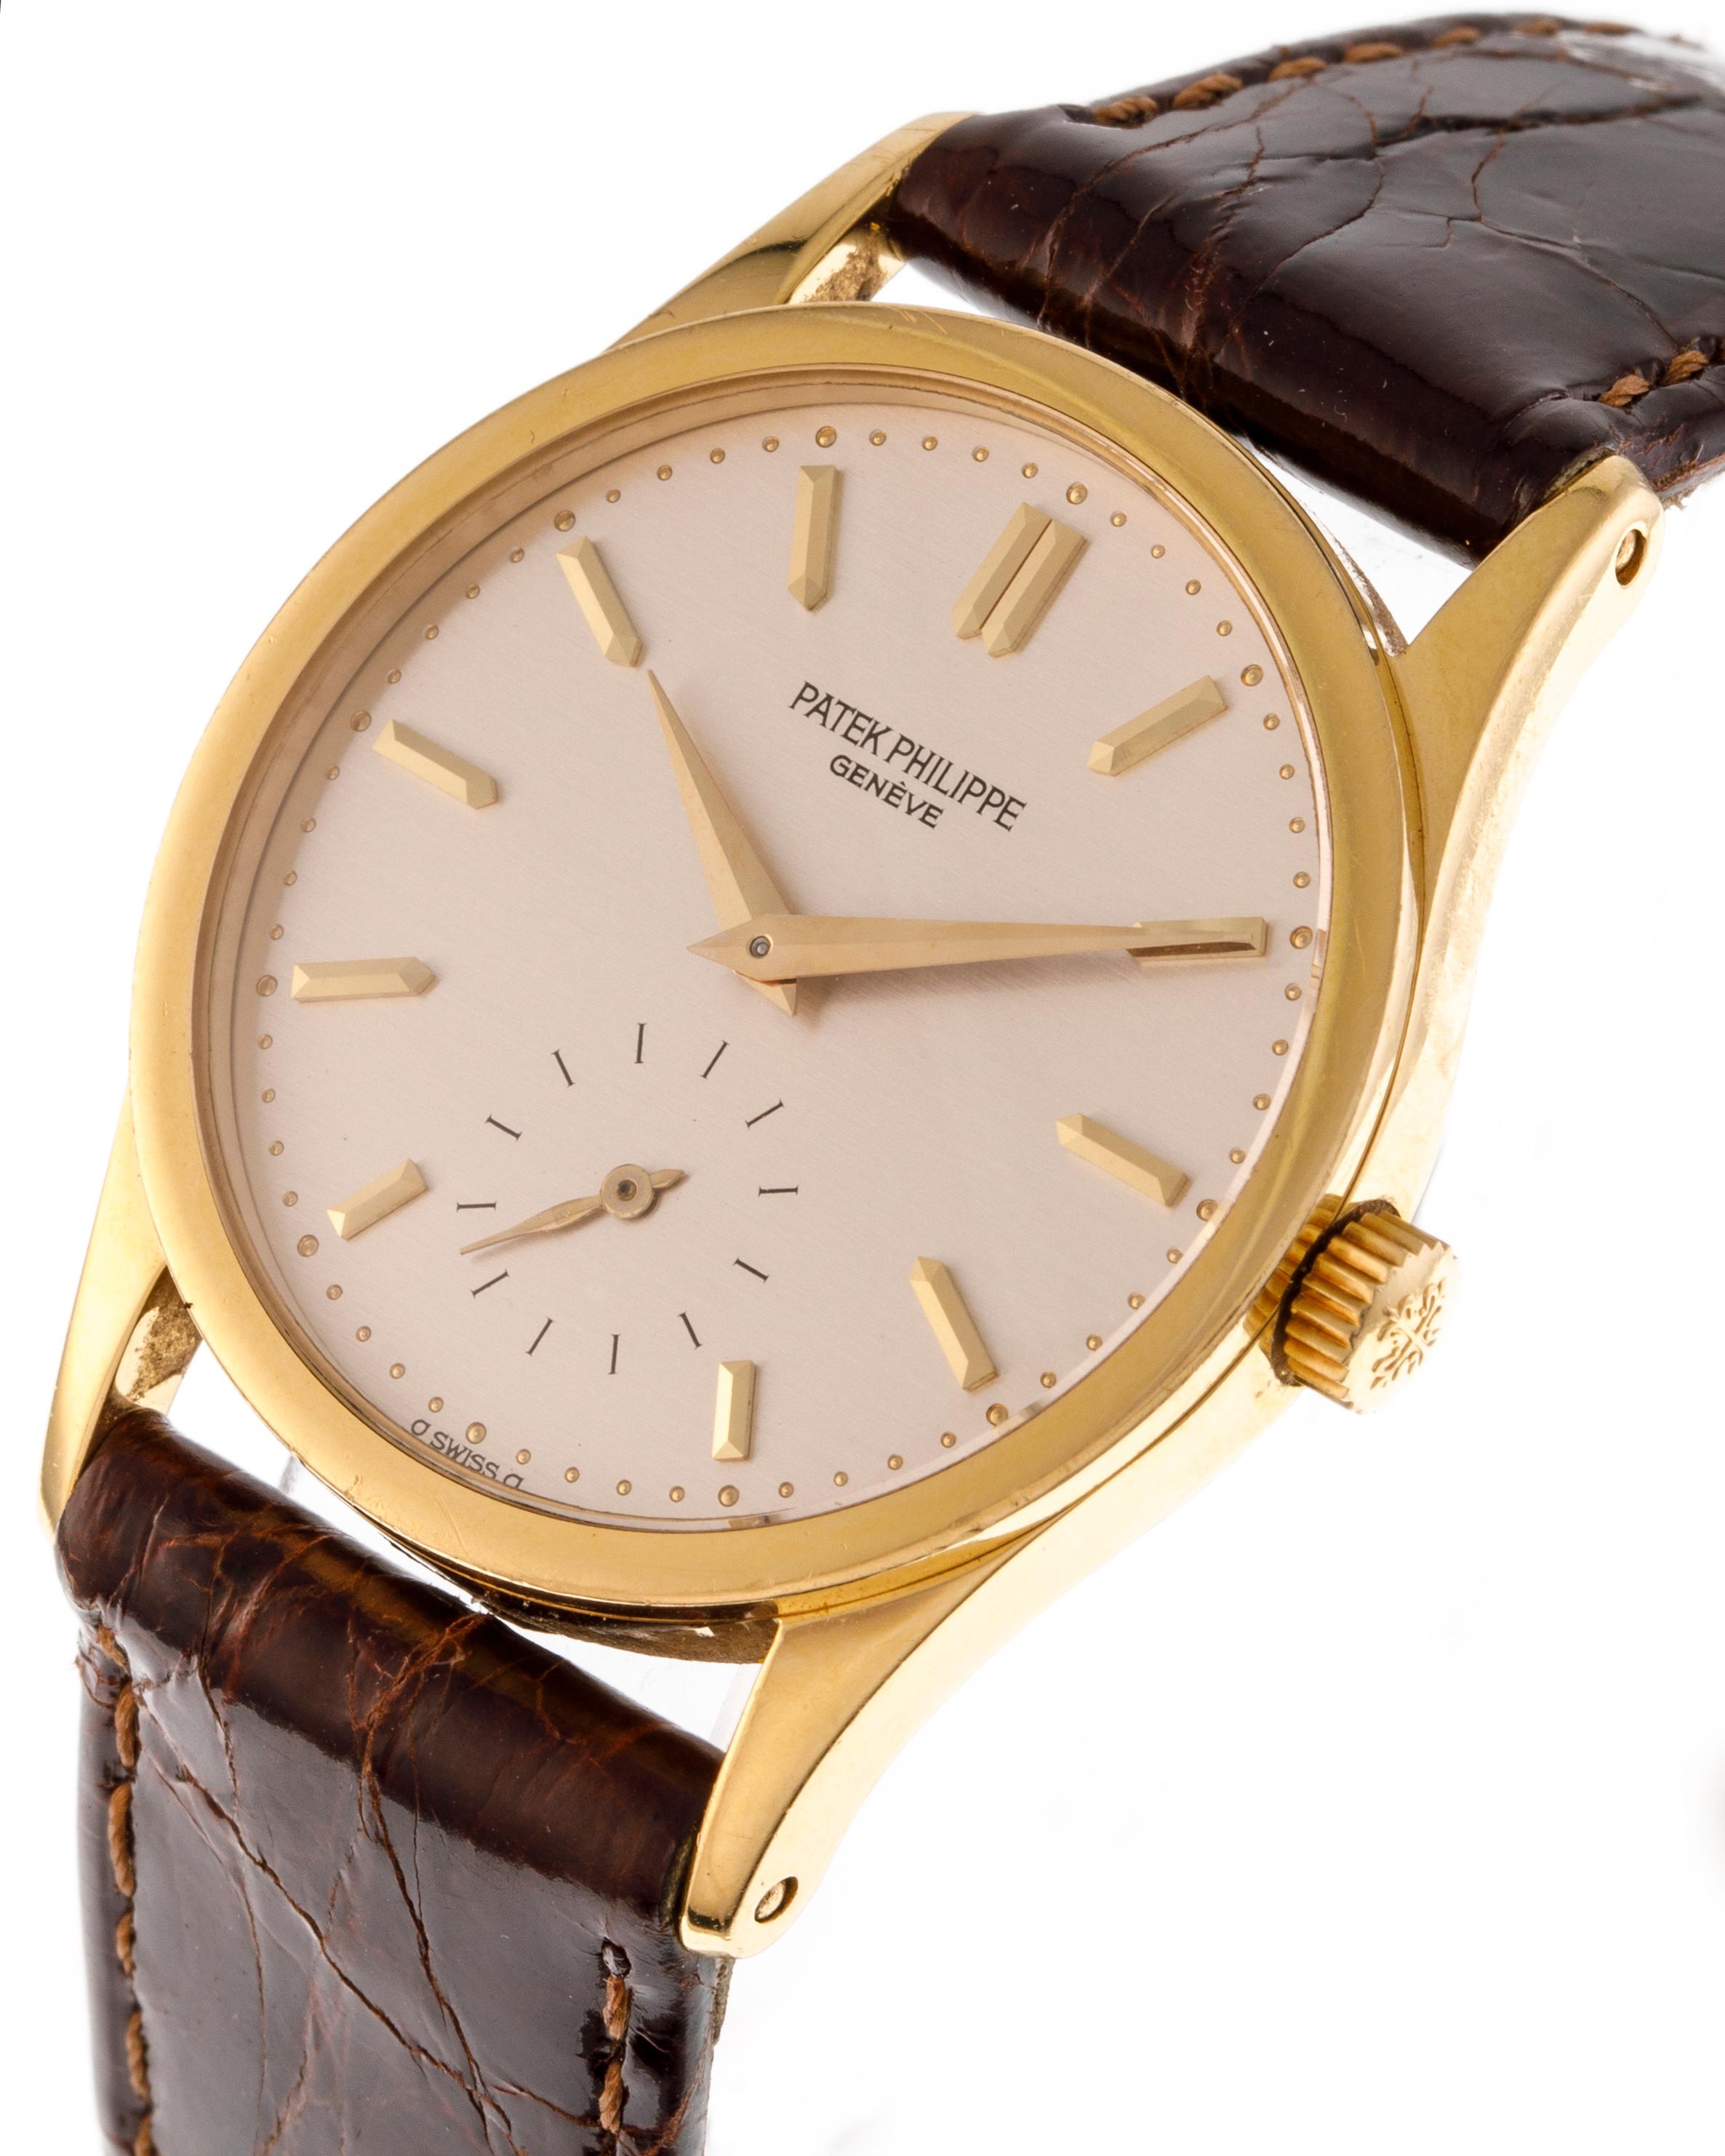 Case: circular case 18kt yellow gold 33mm, snap on back in three parts.

Dial: silvered, applied 12 yellow gold sword shape indexes, pearl minute track subsidiary second hand.

Movement: manual winding Cal.215PS

Year: late 1988

The watch is